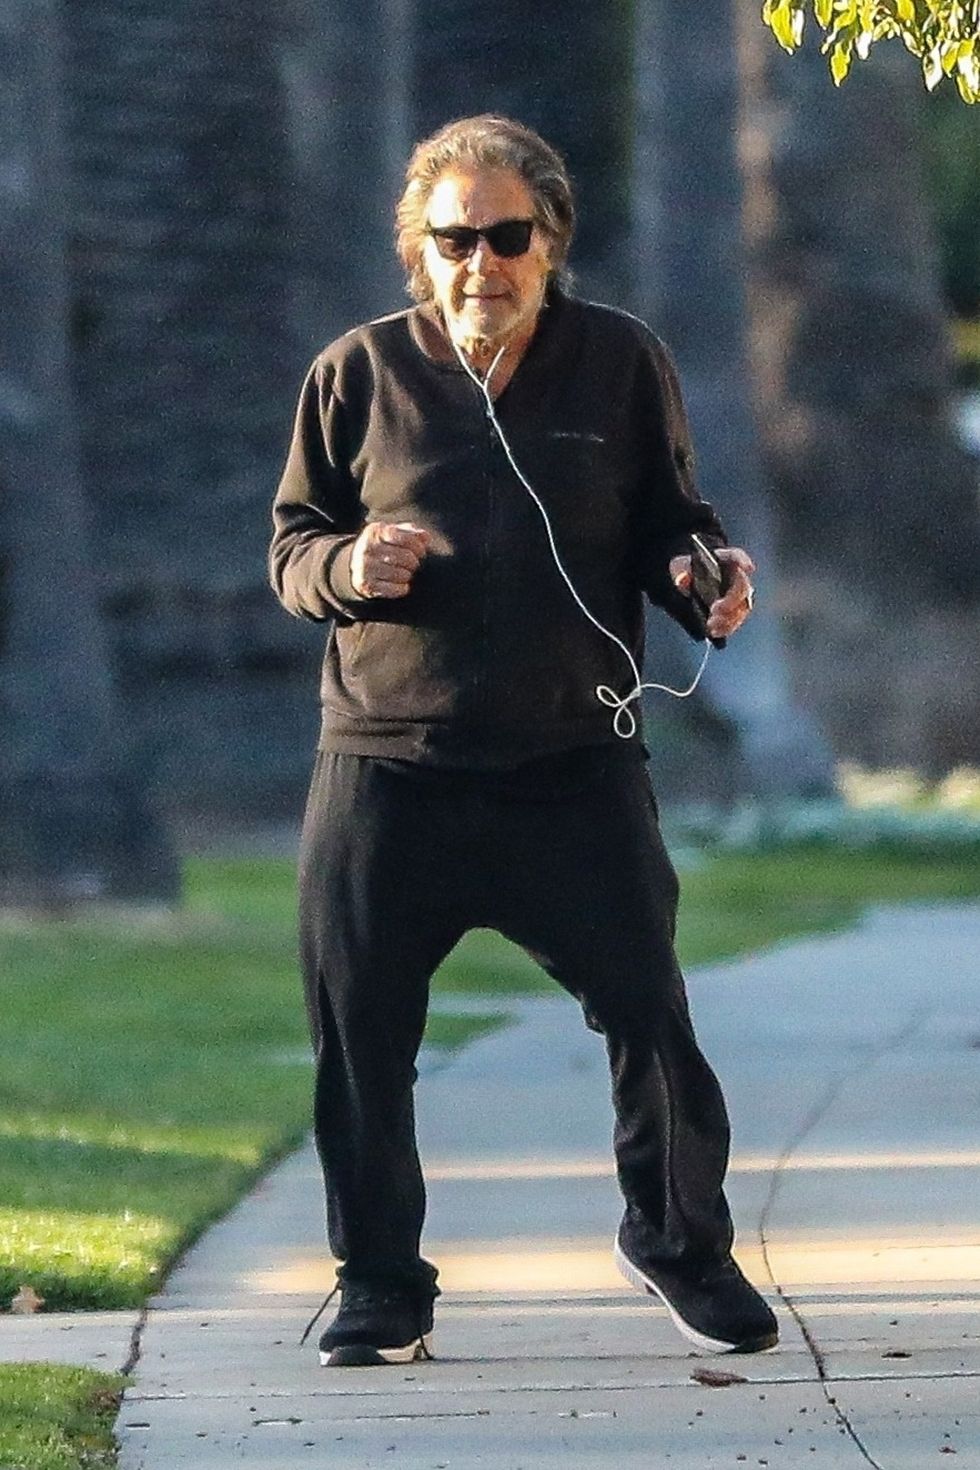 beverly hills, ca    exclusive    legendary actor al pacino feels the vibes and dances along to music on his headphones while out for a walk around his beverly hills neighborhood on tuesday afternoon the legendary actor appeared to have revived some of his famous tango moves from scene of a womanpictured al pacinobackgrid usa 10 february 2022 byline must read backgridusa 1 310 798 9111  usasalesbackgridcomuk 44 208 344 2007  uksalesbackgridcomuk clients   pictures containing childrenplease pixelate face prior to publication